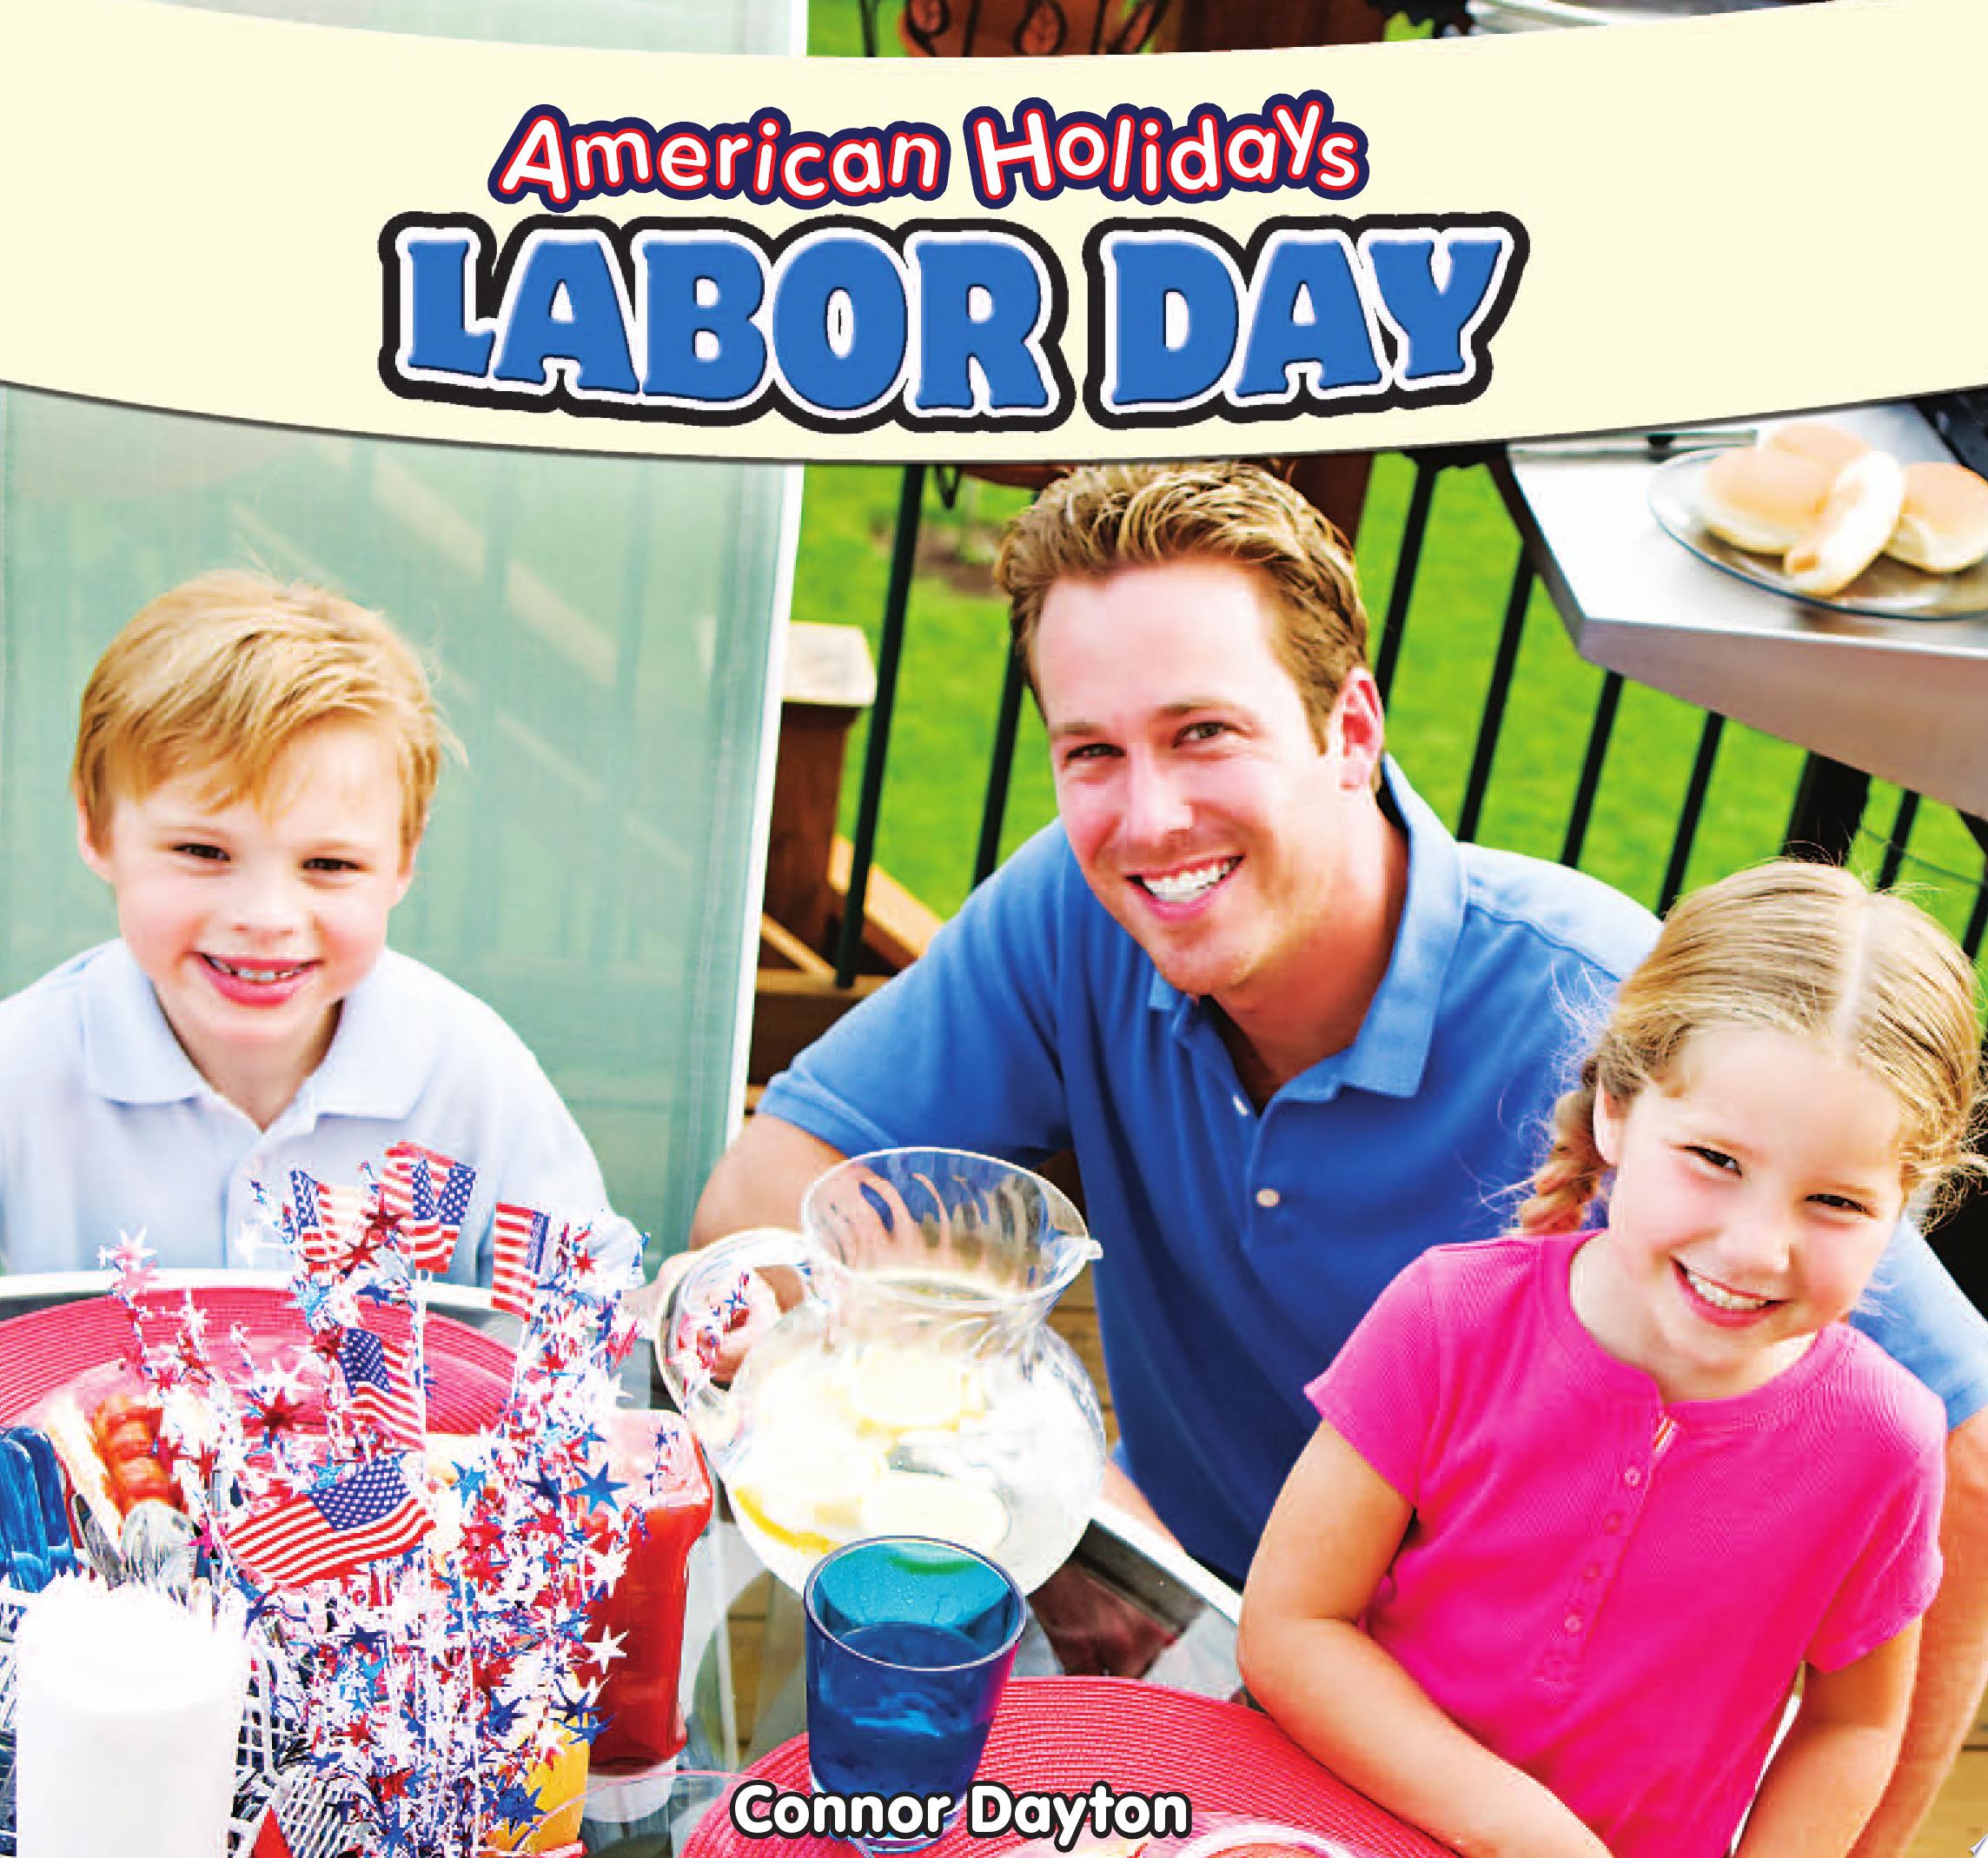 Image for "Labor Day"